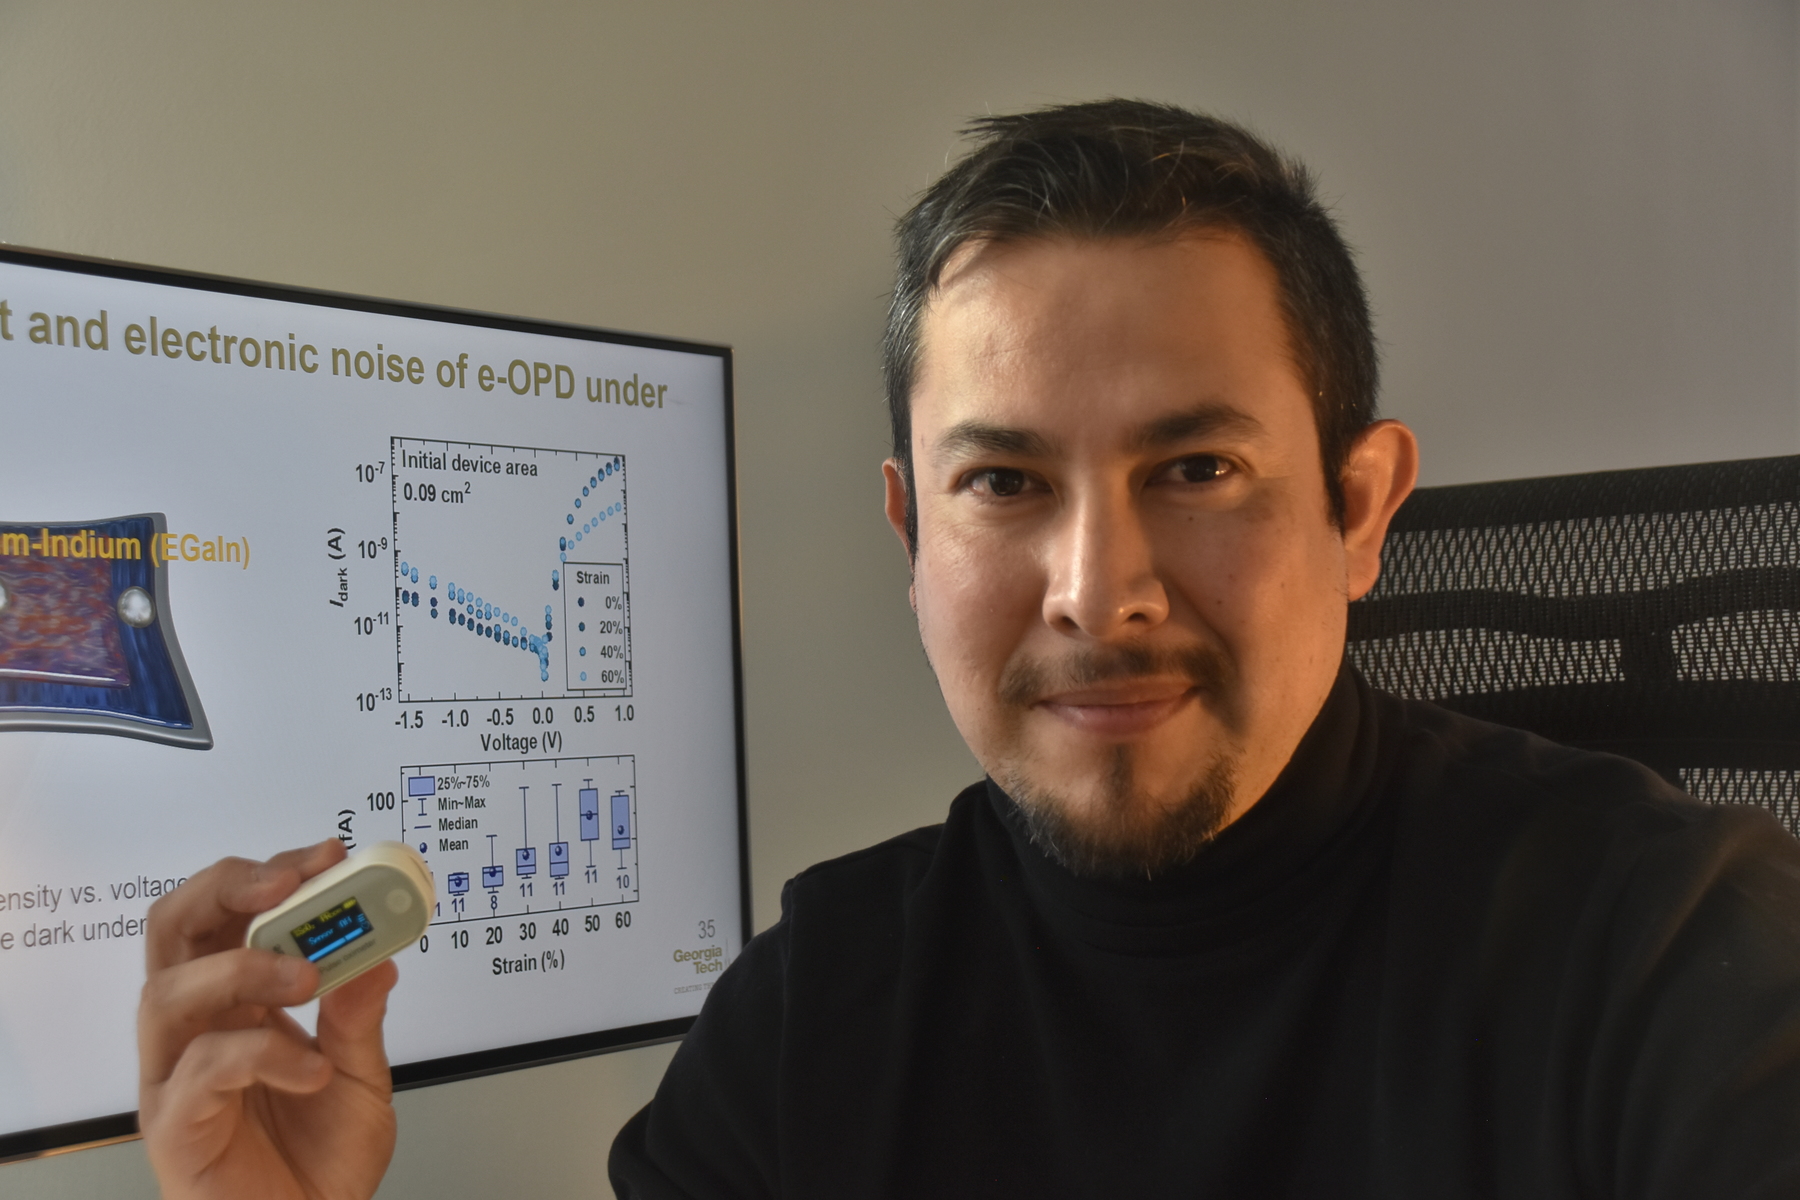 Prof. Canek Fuentes-Hernandez sees a great potential to use high-performance soft and stretchable photodetectors to enable pulse oximeters, like the one he is holding in his hand, to become more ergonomic and to consume less power. (Photo credit: Canek Fuentes-Hernandez)